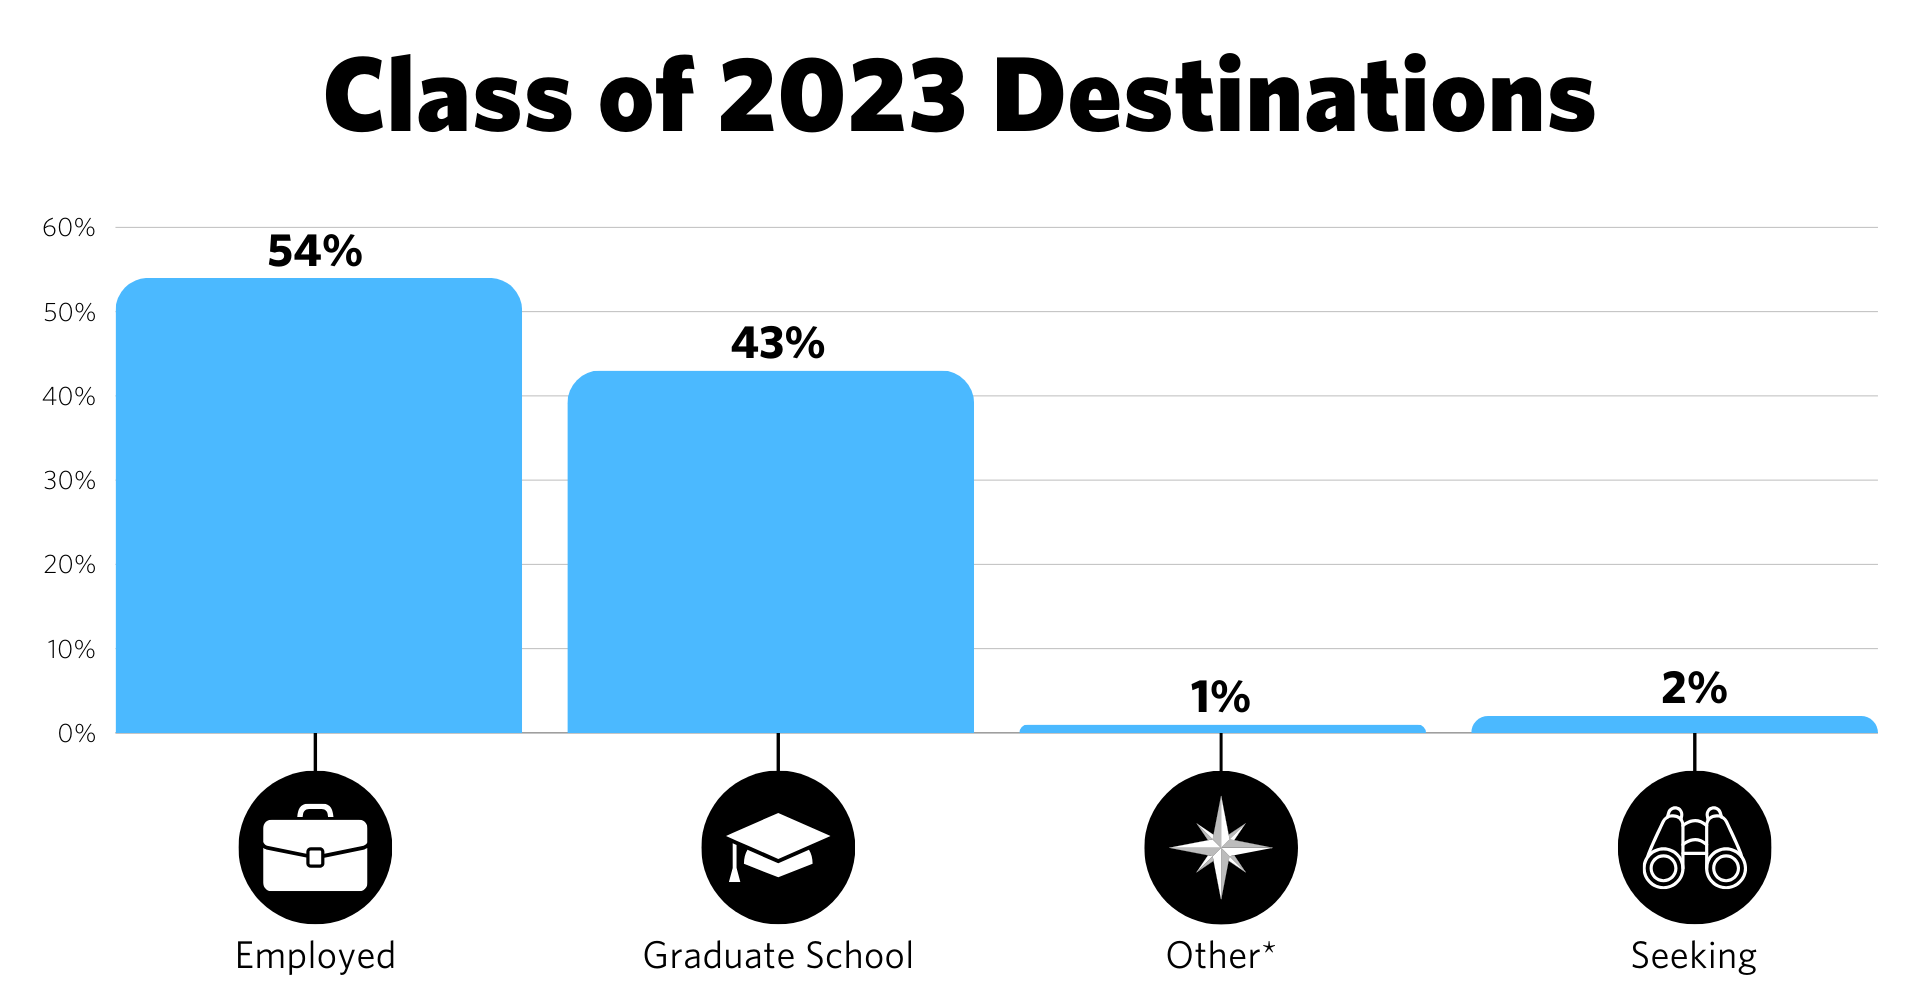 54% of graduates are employed. 43% are attending graduate school. 1% are engaged in other activities (other includes research fellowships, travel and volunteering). 2% are seeking.